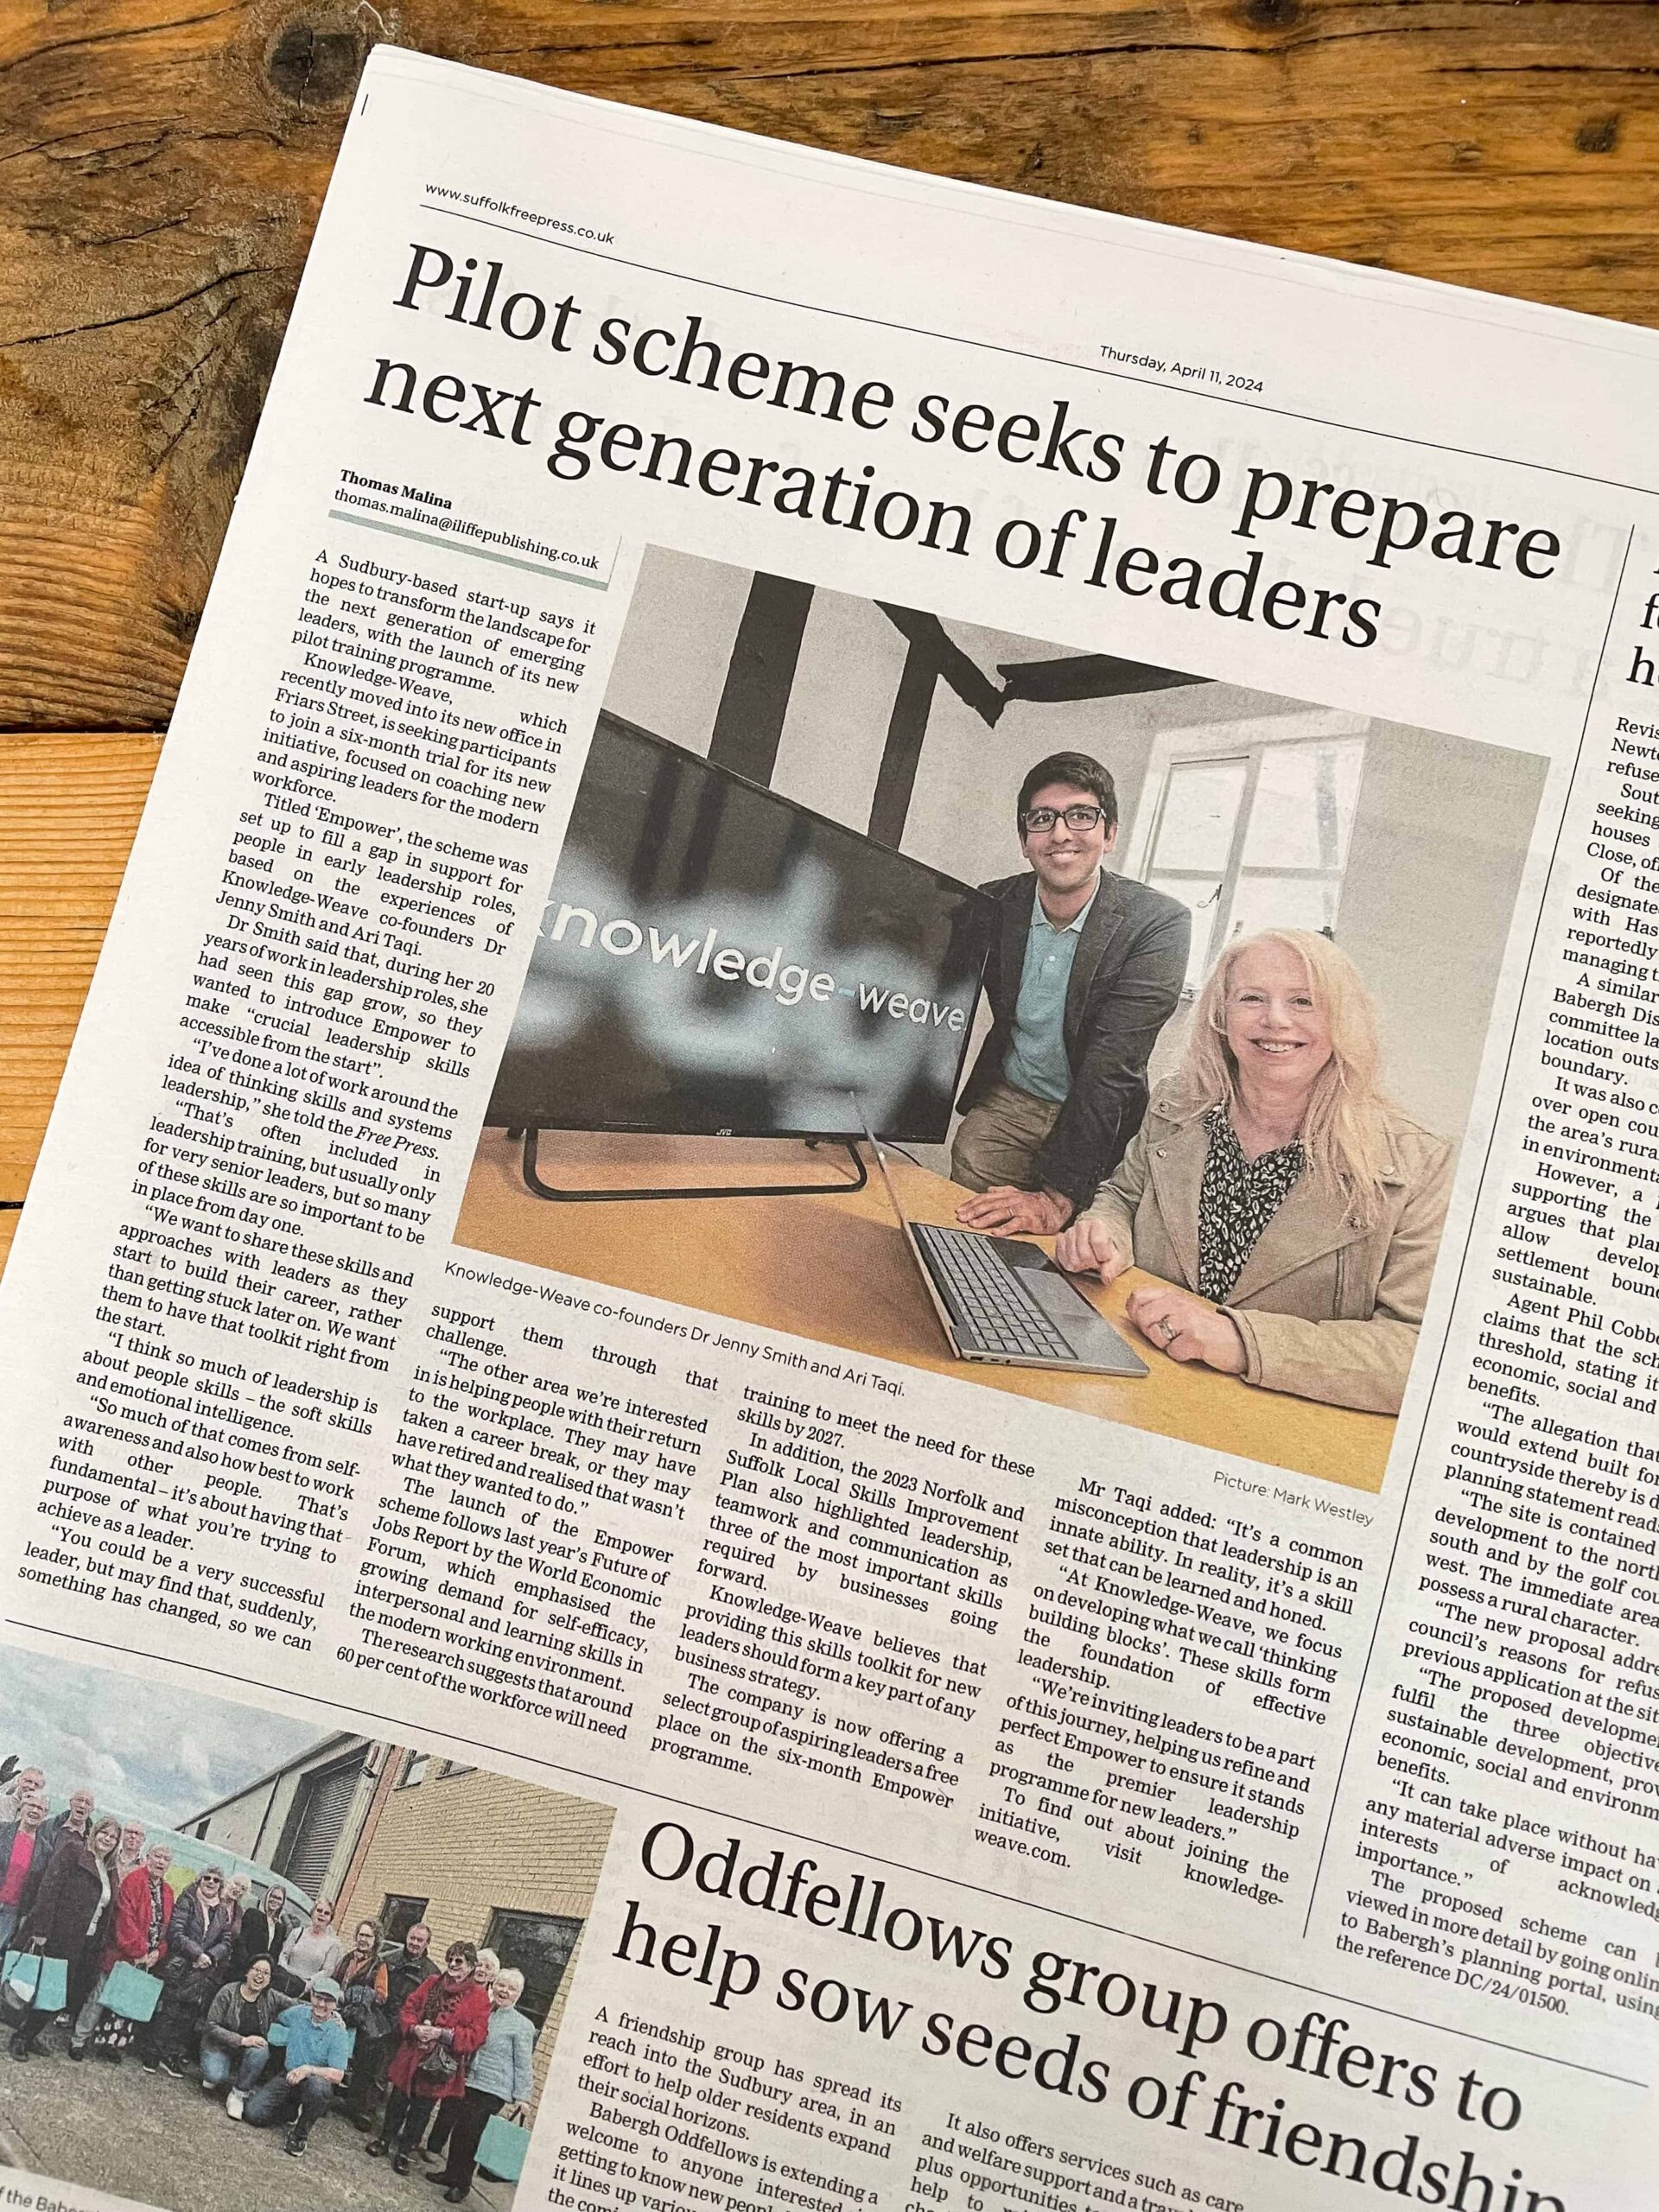 Suffolk Free Press clipping - Knowledge-Weave seeks volunteers to trial new scheme | Branding Services delivered by Mackman.